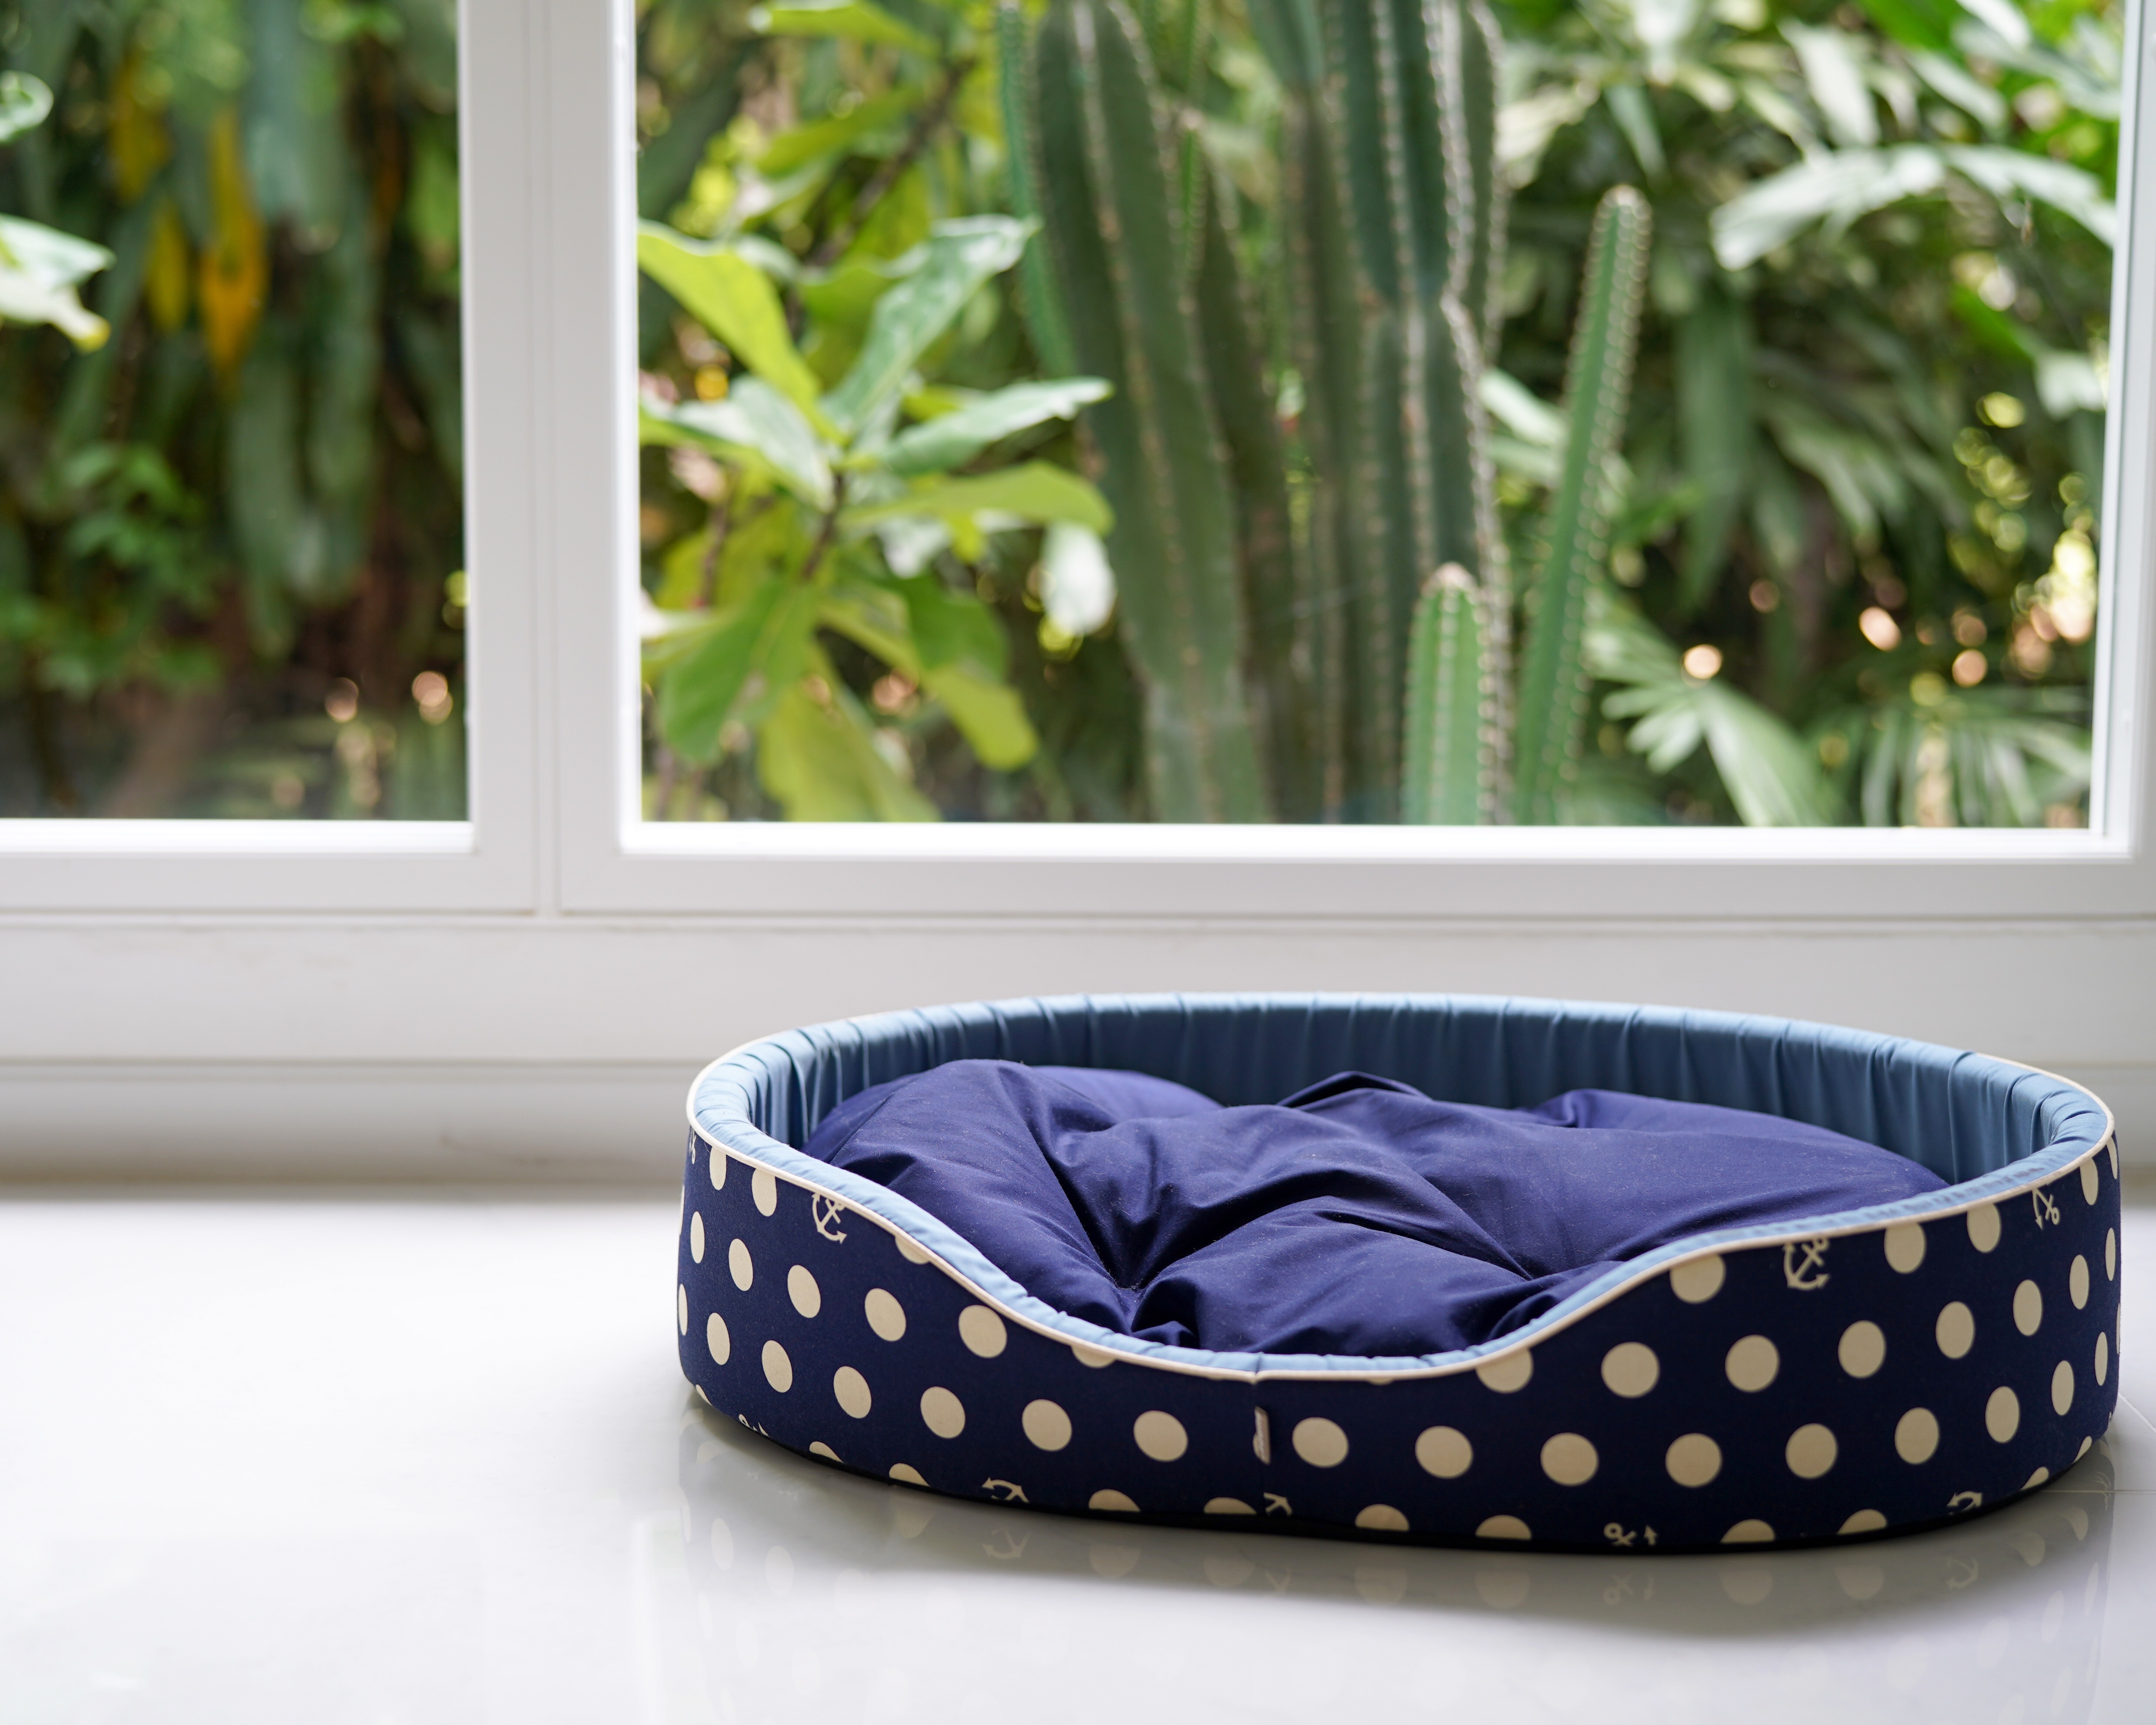 An empty dog bed in a room | Source: Shutterstock